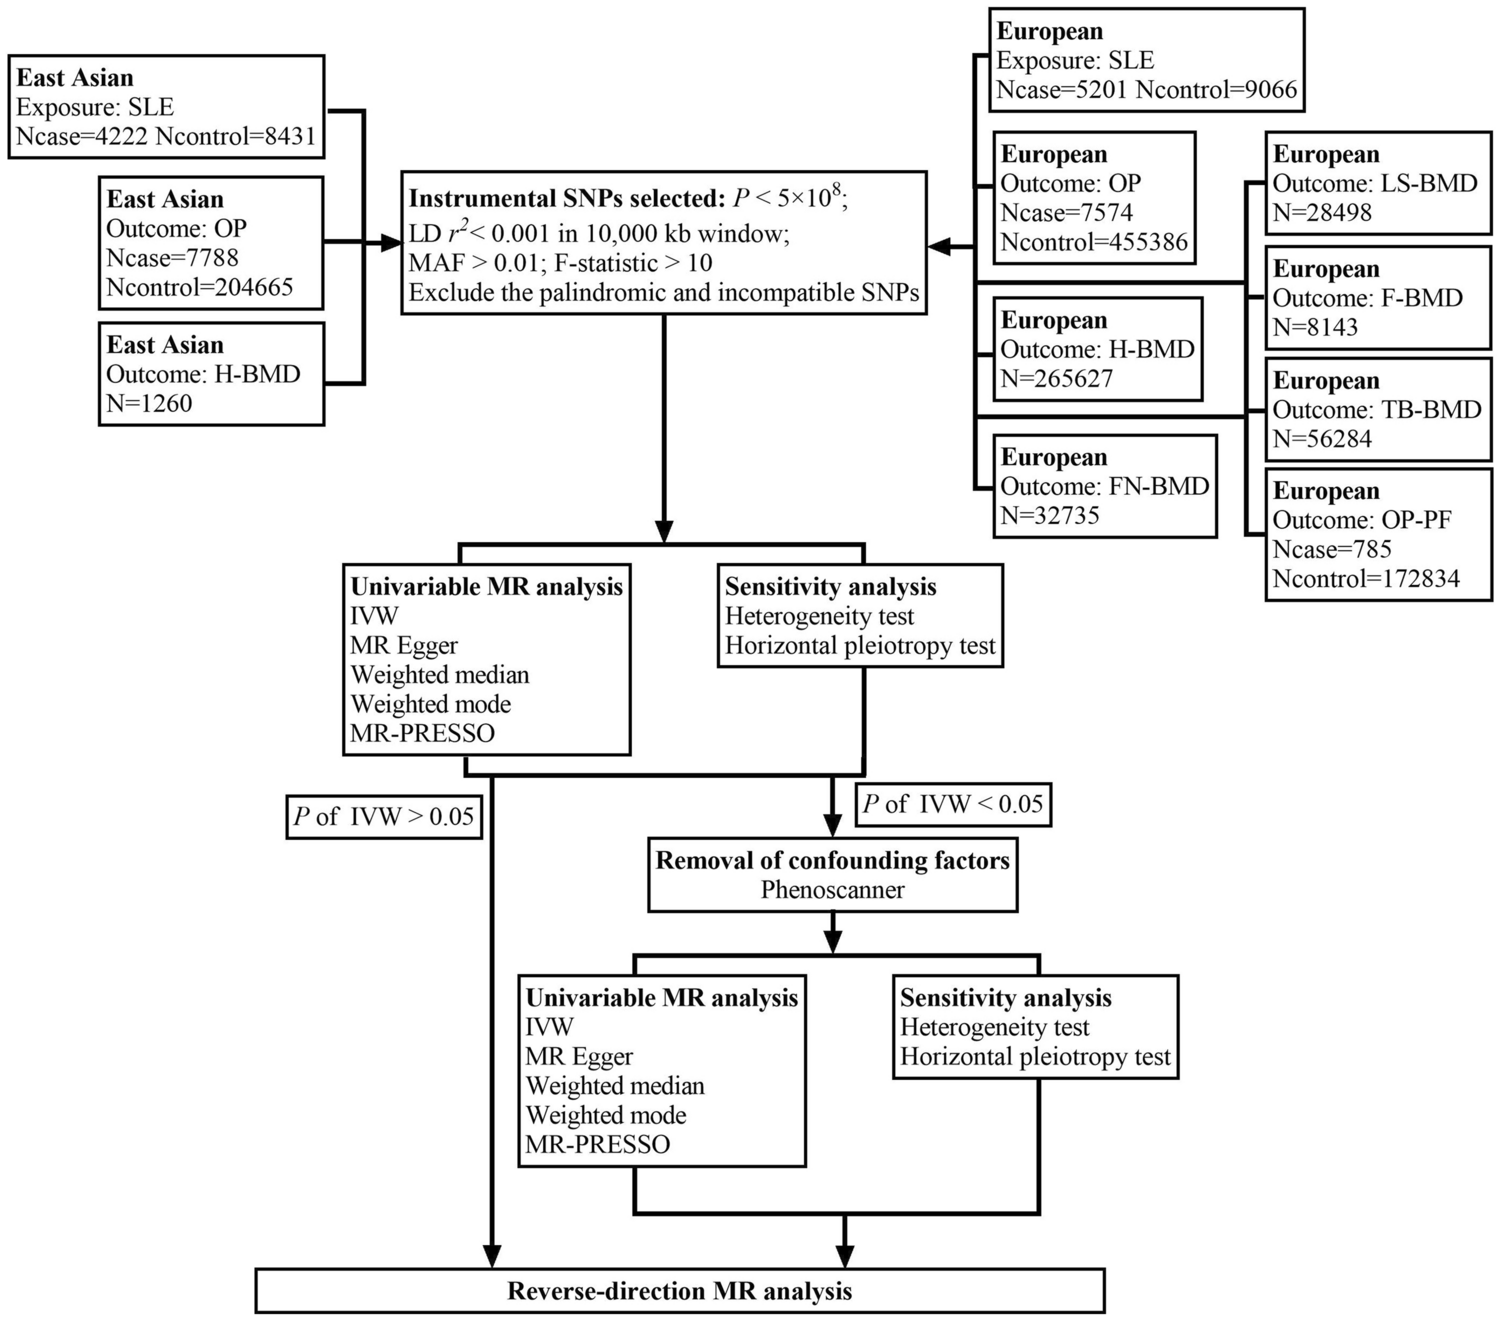 The Relationship Between Systemic Lupus Erythematosus and Osteoporosis Based on Different Ethnic Groups: a Two-Sample Mendelian Randomization Analysis